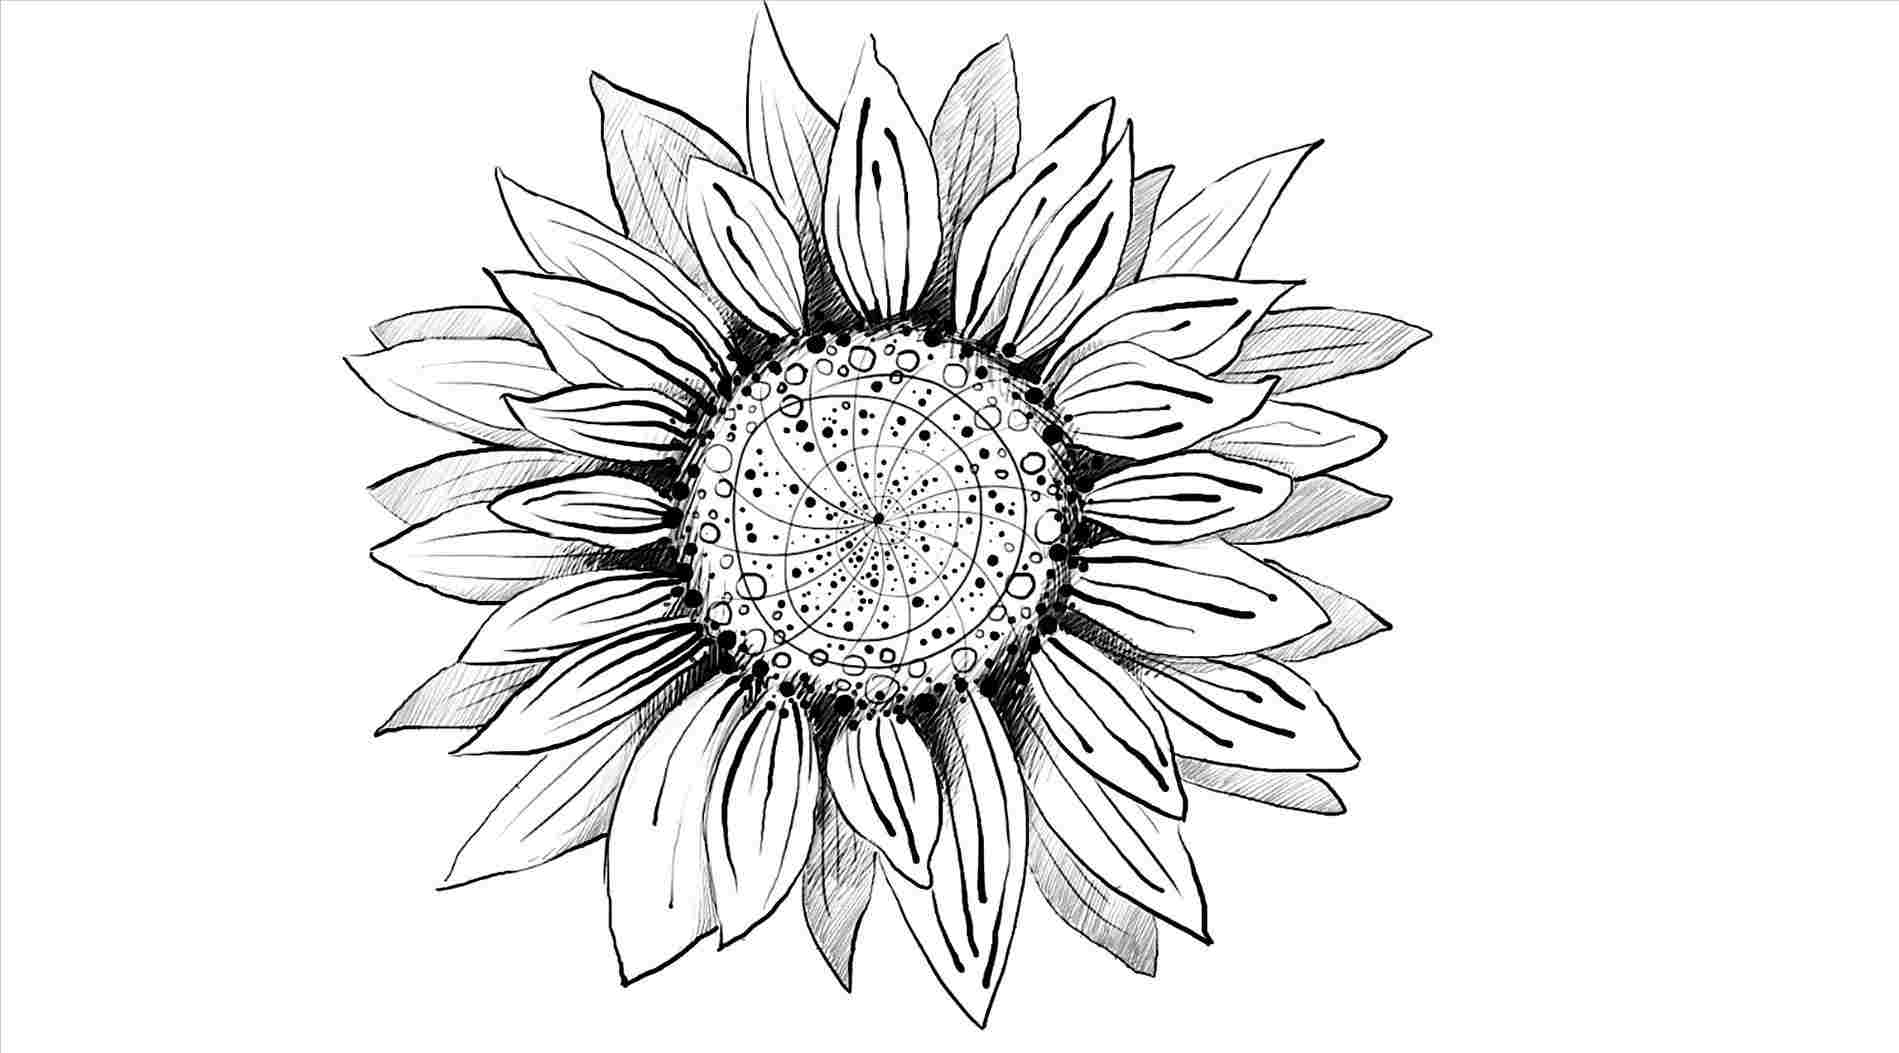 Ohio Outline Tattoo with Sunflower - wide 5